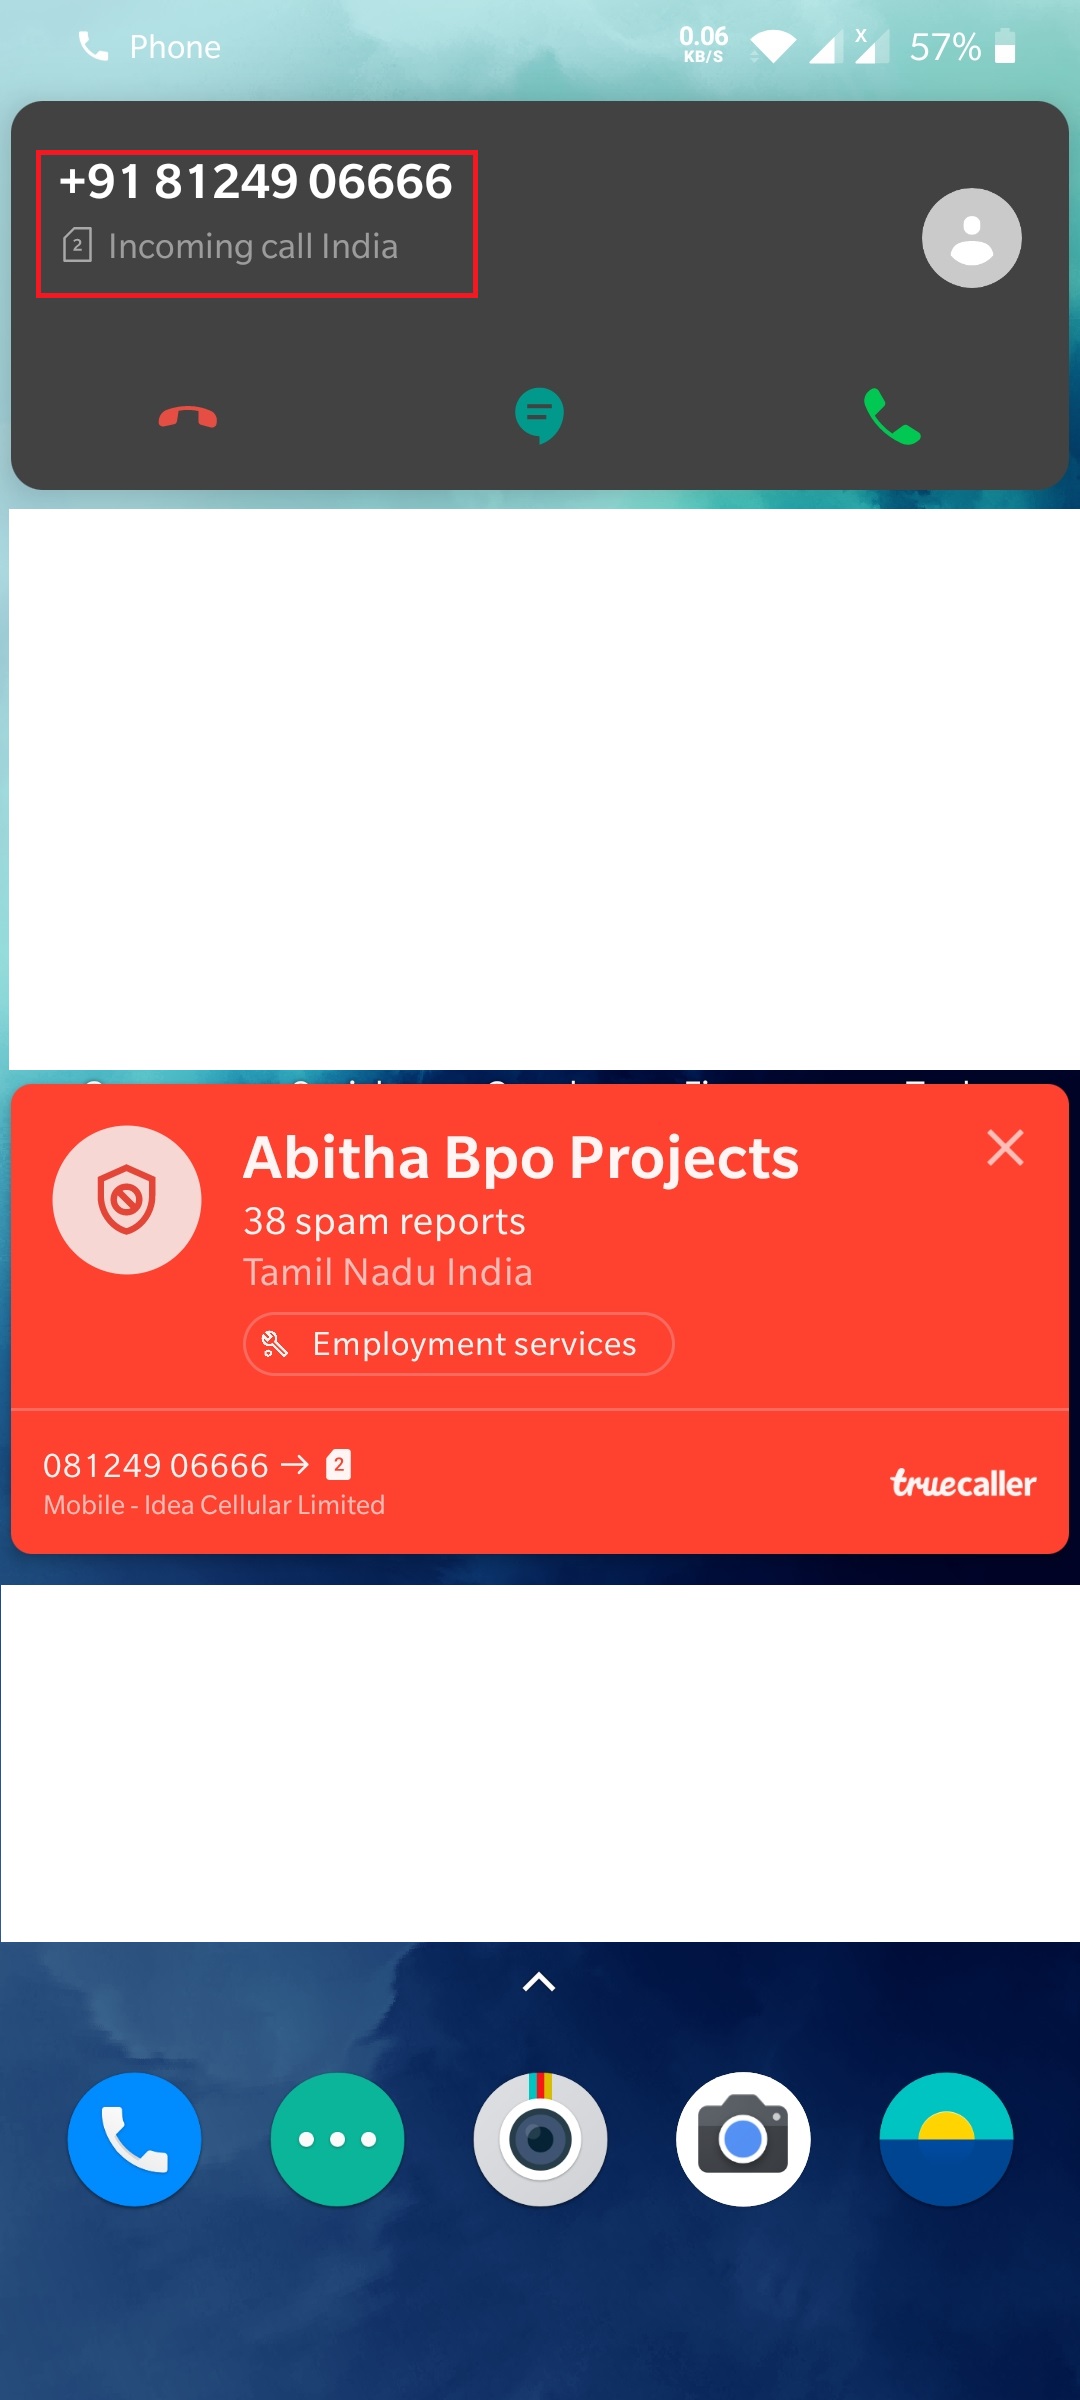 bpo projects provider india phone number callback